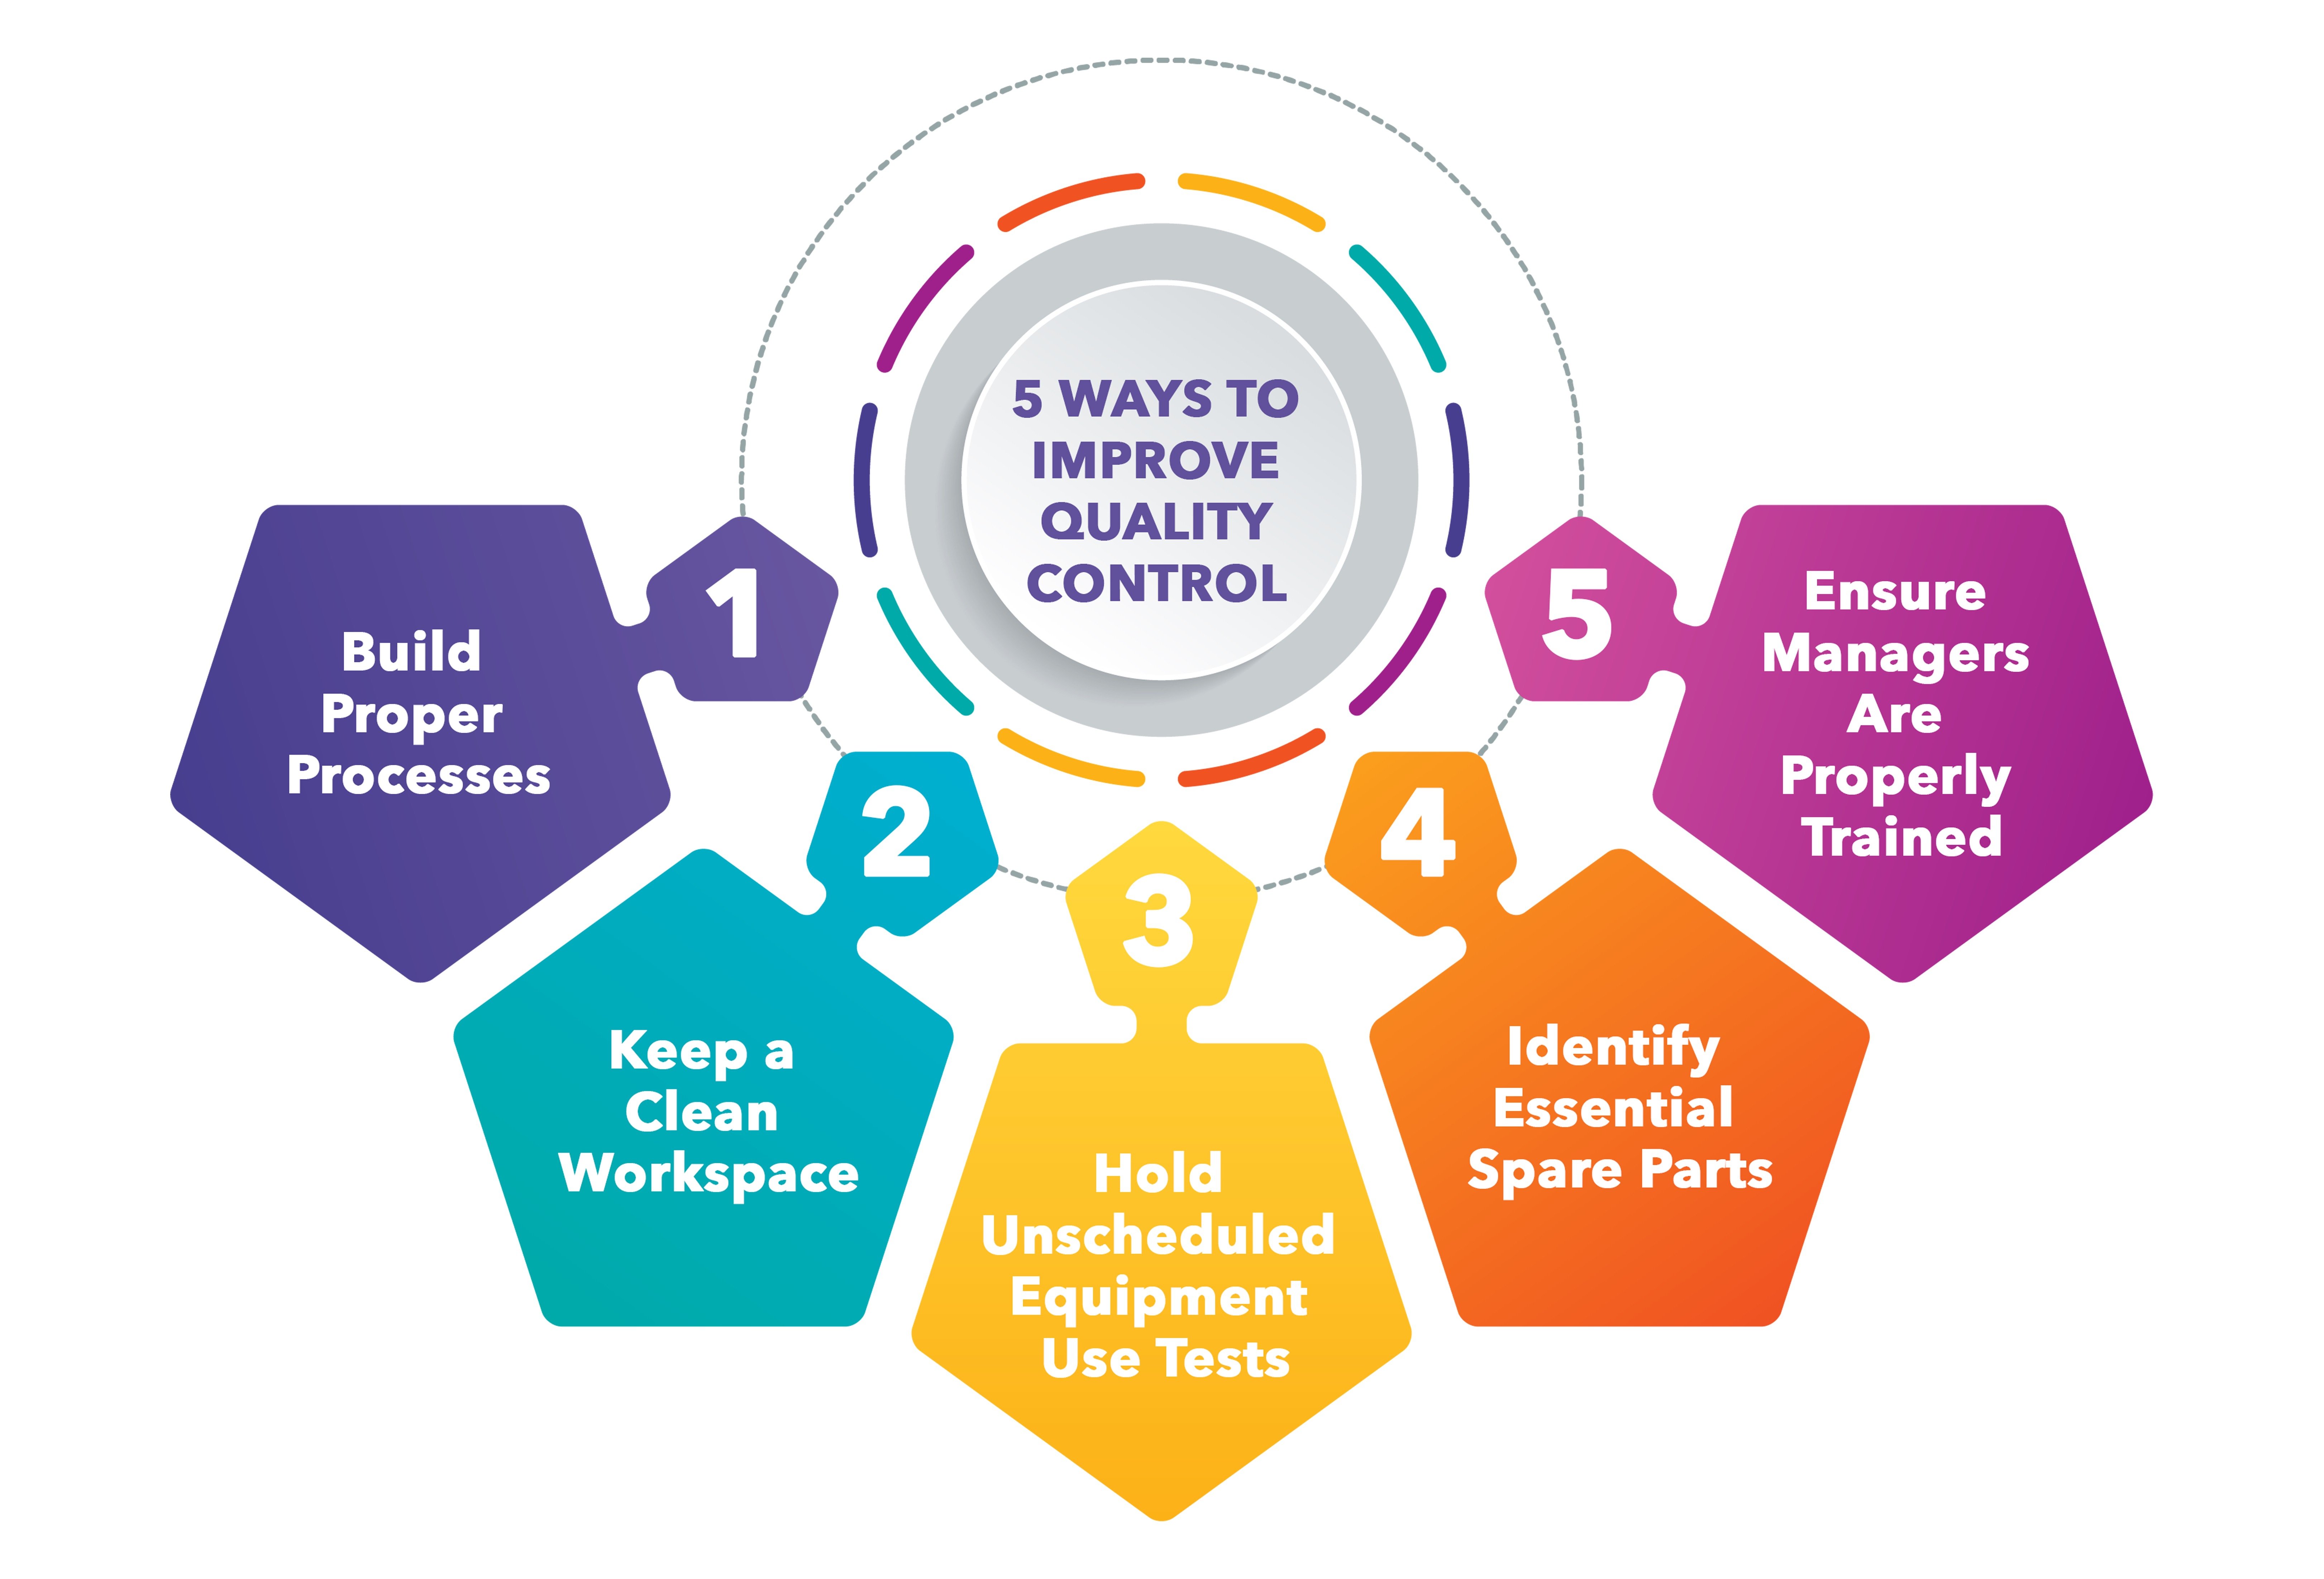  A diagram showing five ways to improve quality control processes in manufacturing: build proper processes, keep a clean workspace, perform unscheduled equipment use tests, identify essential spare parts, and ensure managers are properly trained.